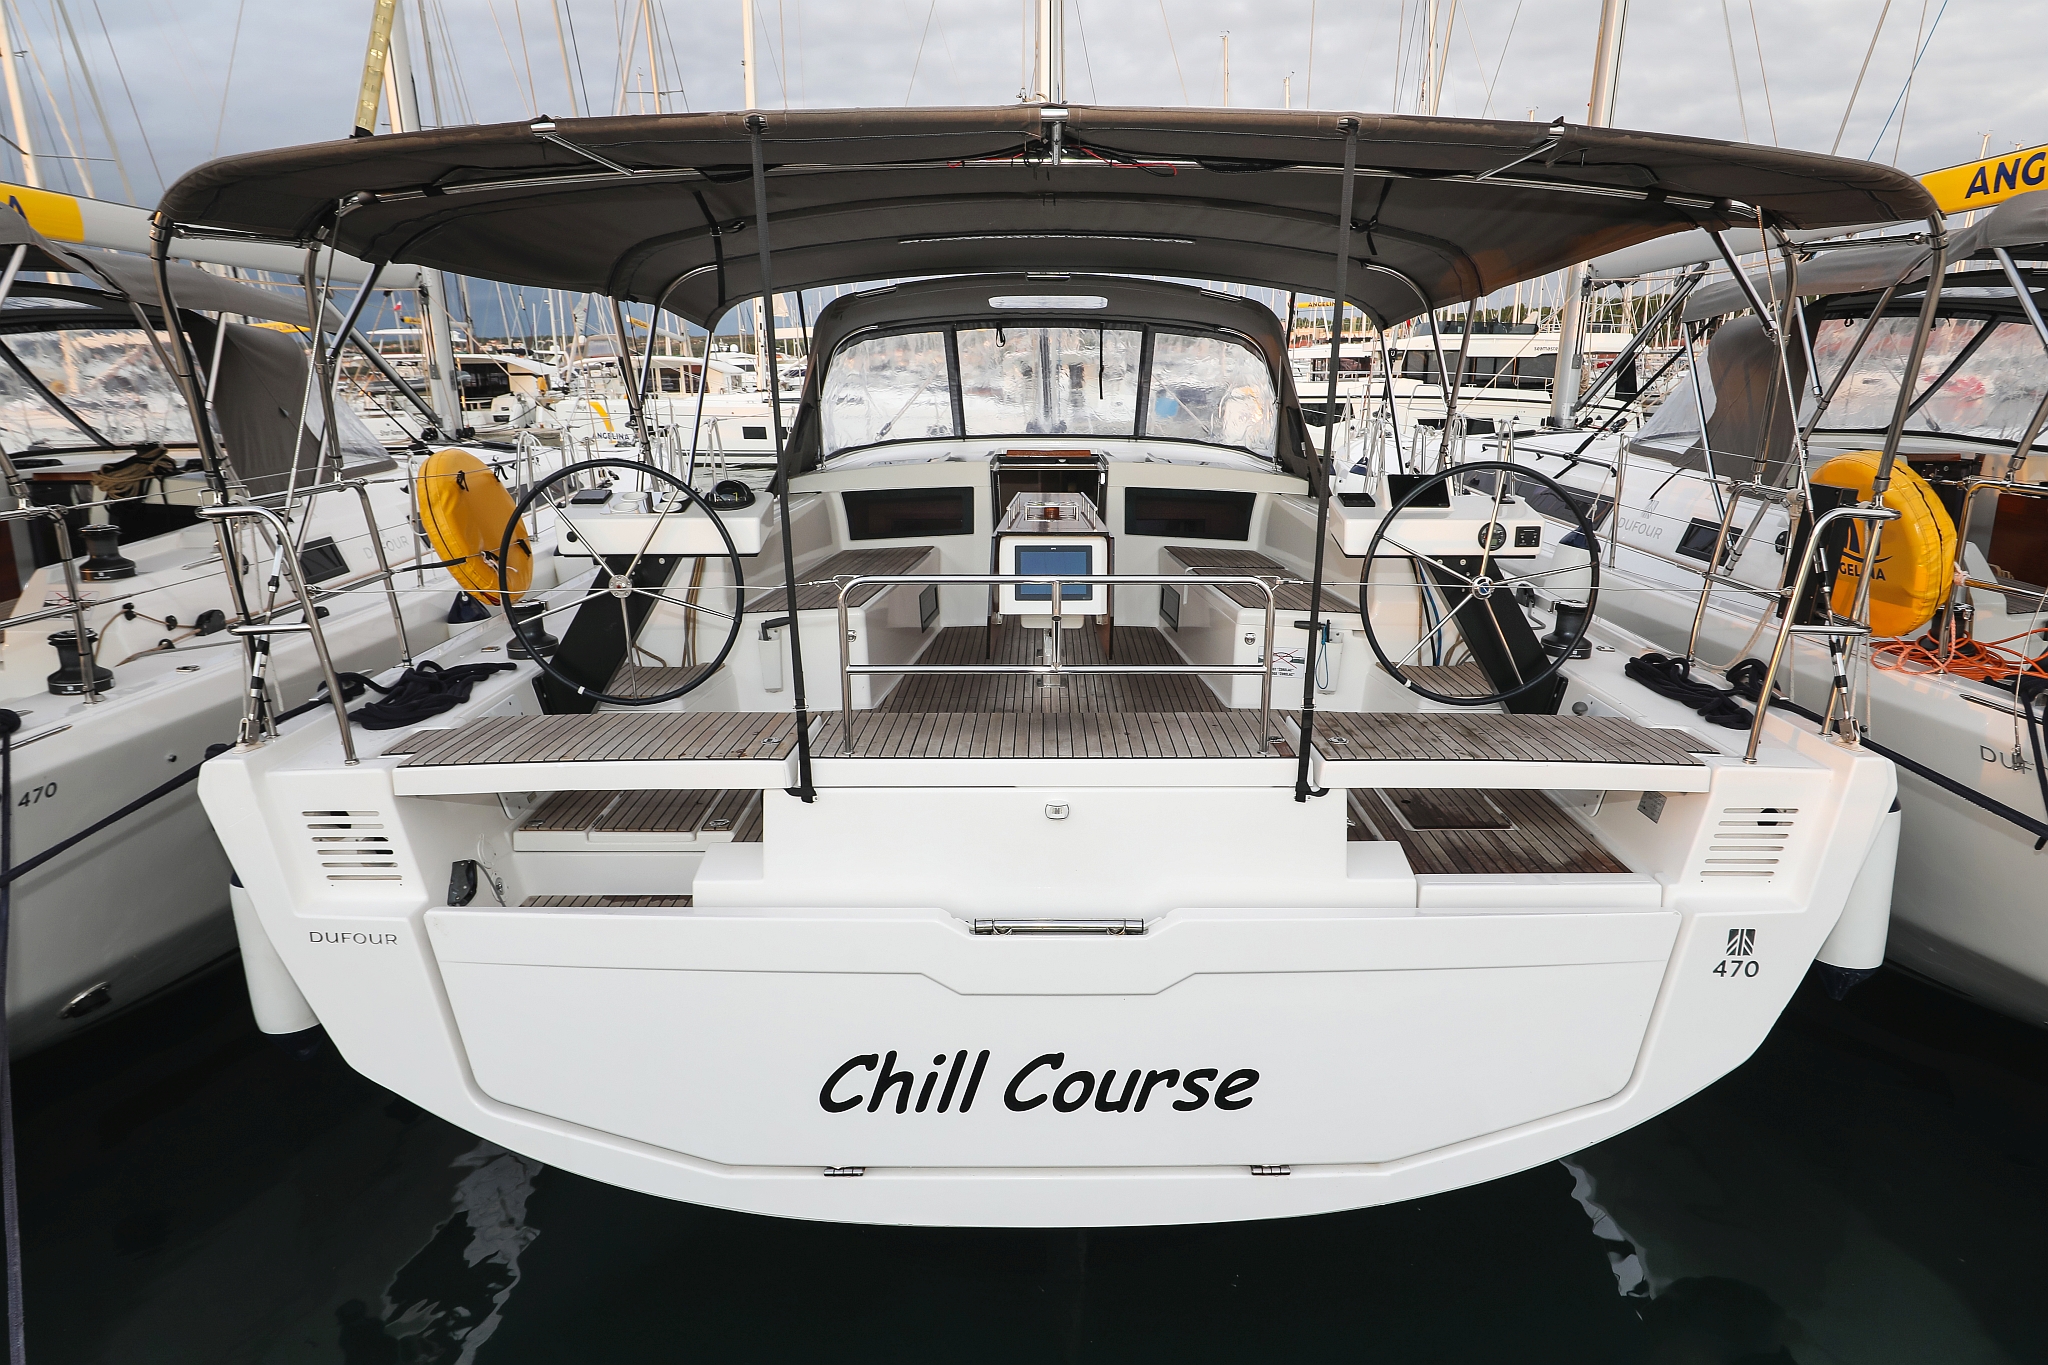 Dufour 470 - 5 cab. - Chill Course